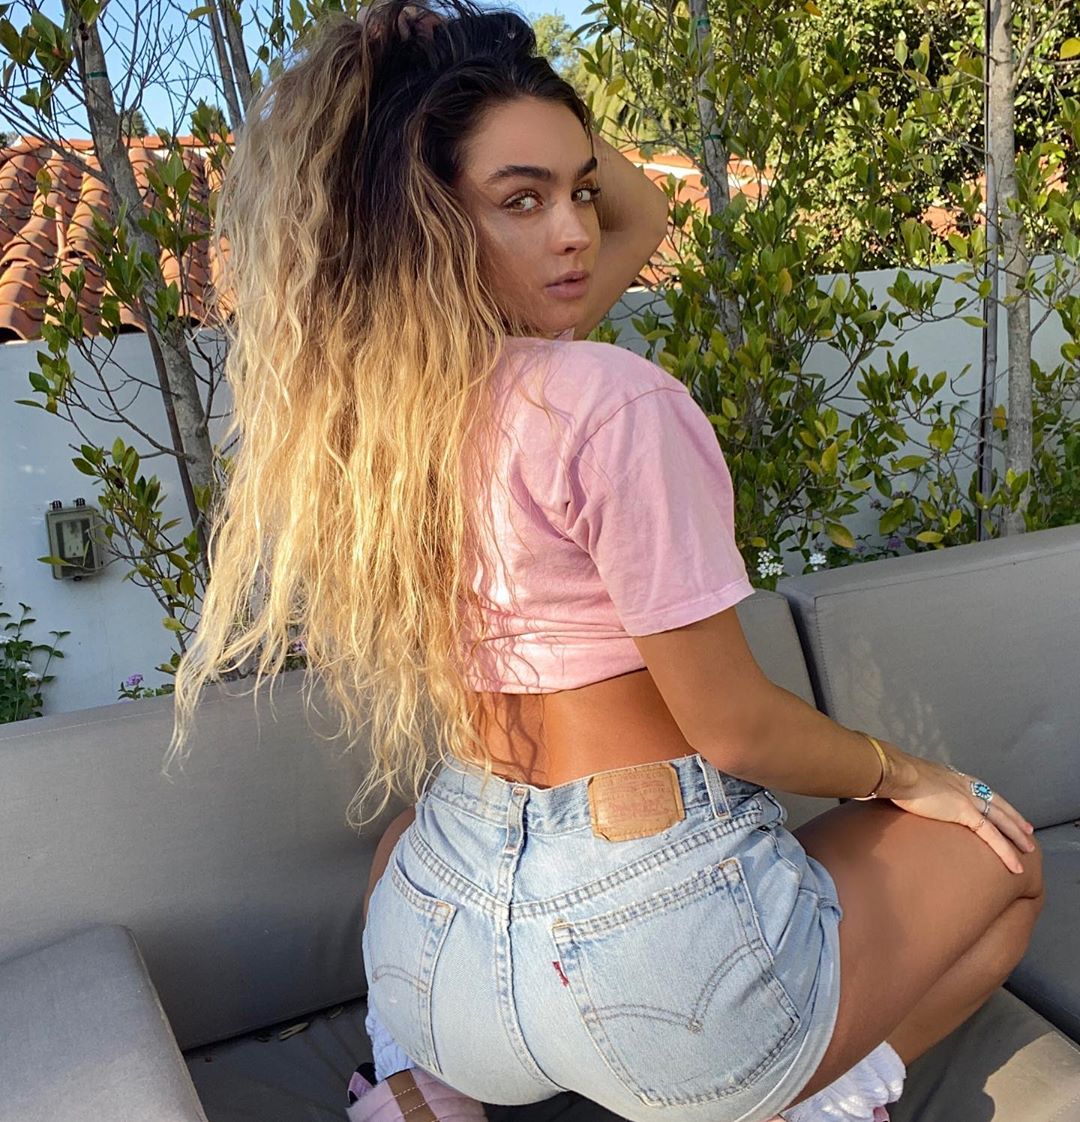 Sommer Ray 2020 : Sommer Ray (@sommerray) - Lates Instagram images and vide...